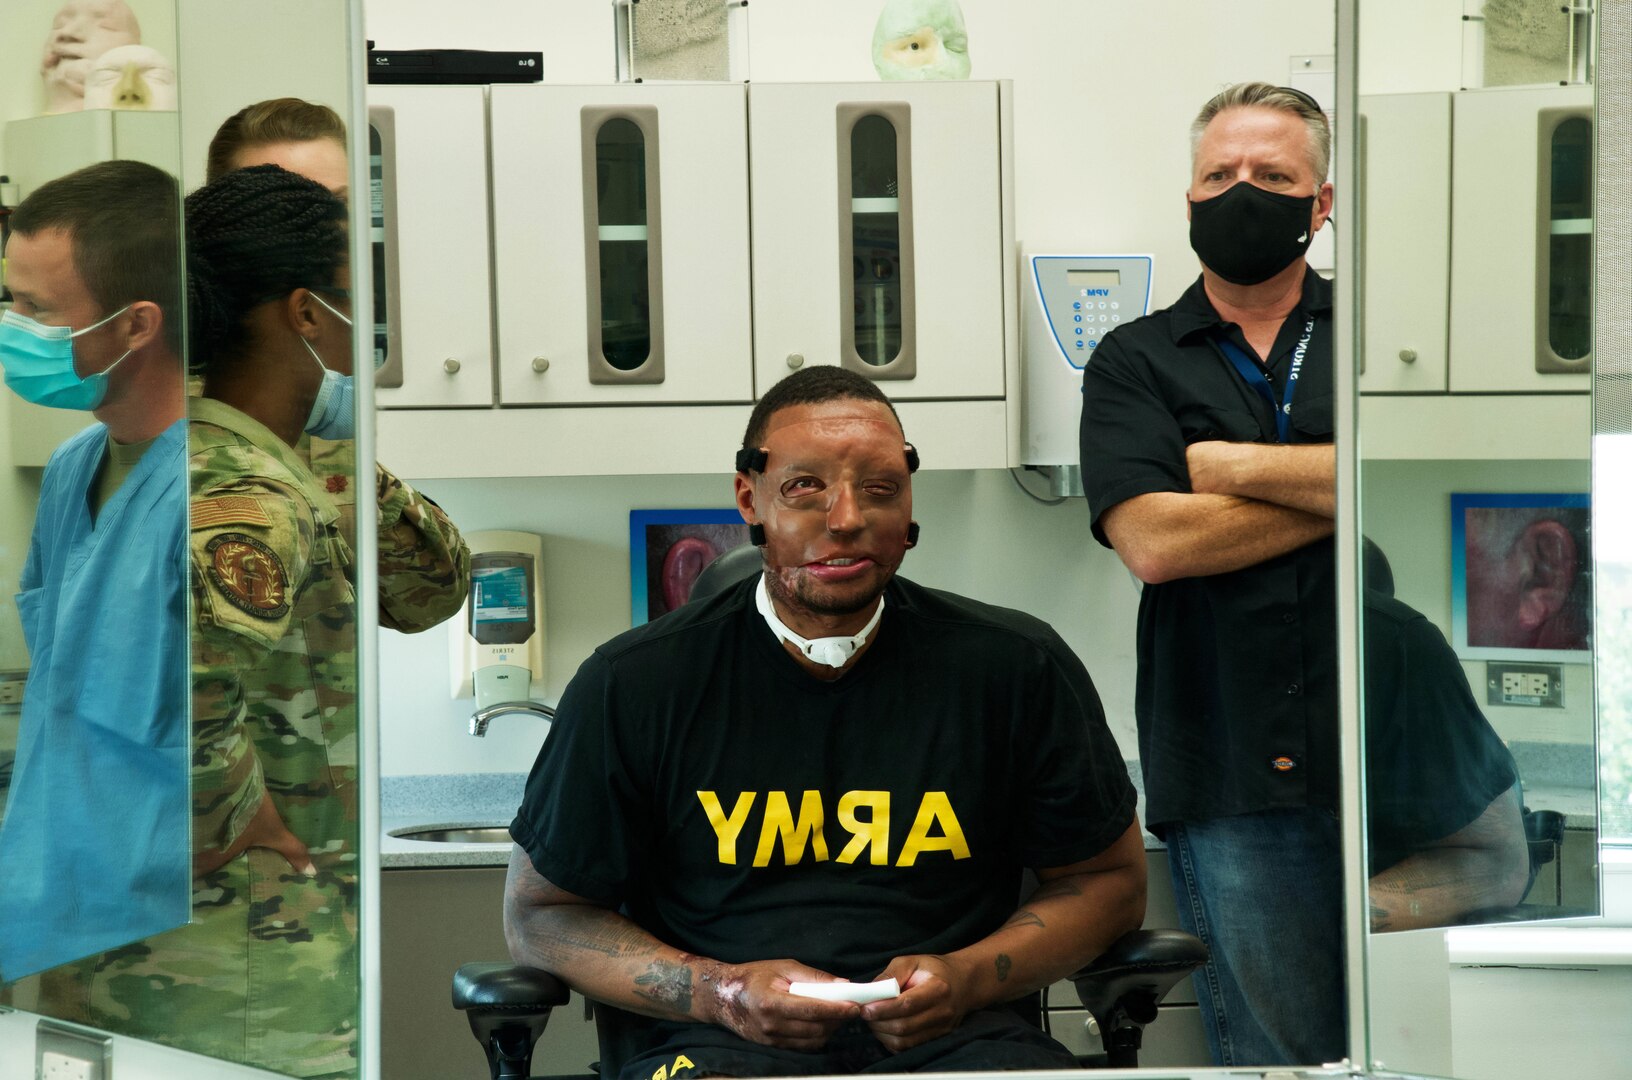 Patient observes reflection of face prosthetic